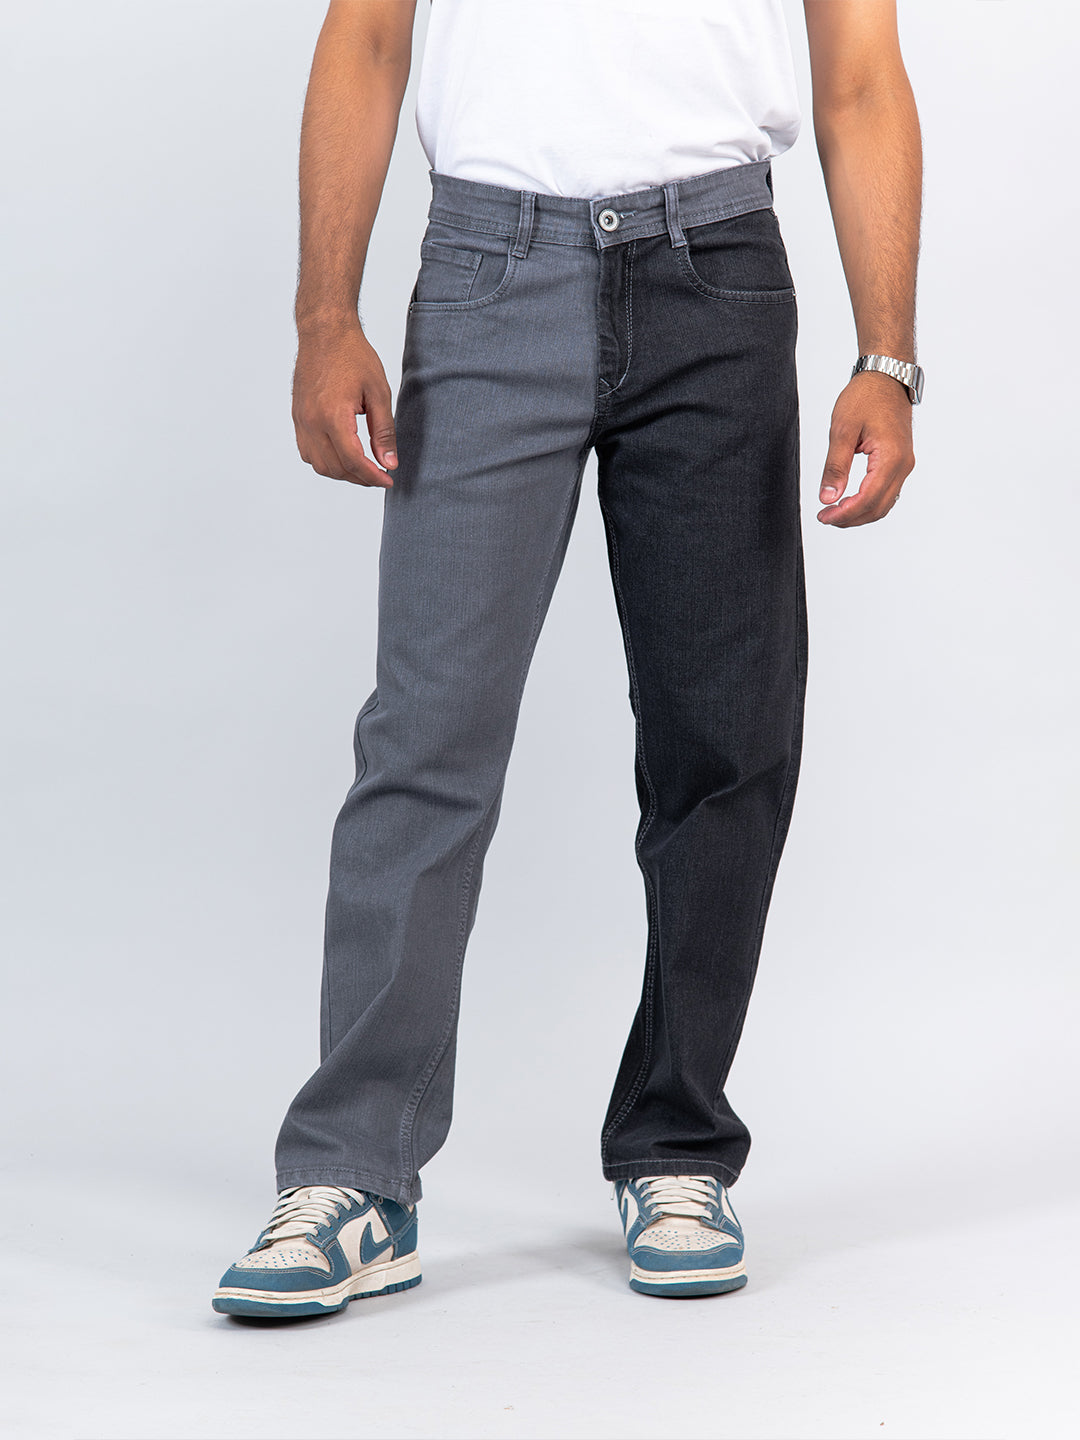 Boys Jeans | Buy Jeans for Boys Online - G3+ Fashion